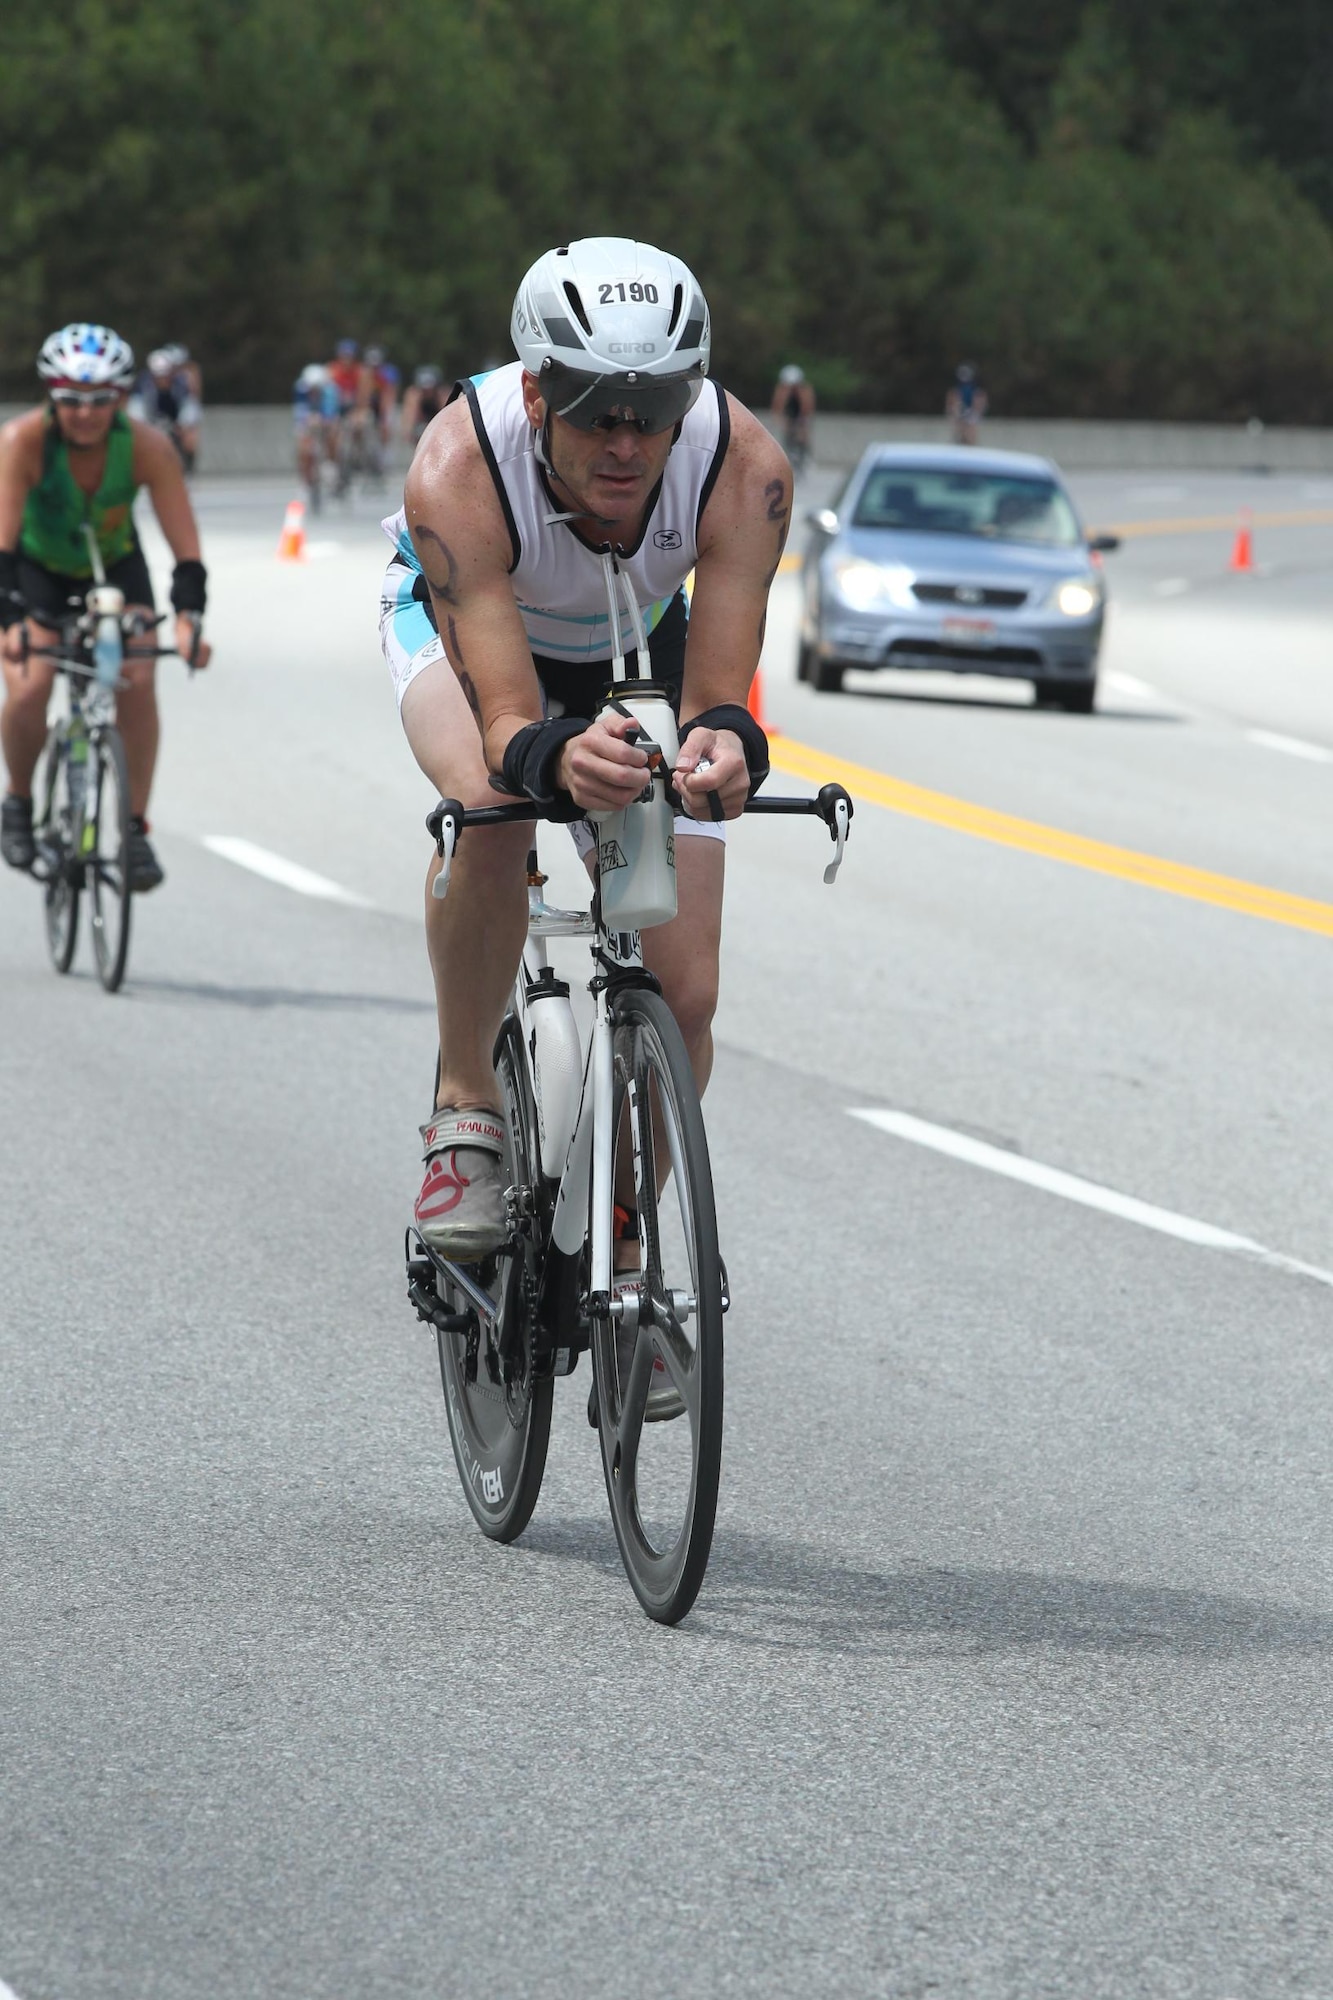 Chief Master Sgt. Sean Larson of the 132d Wing competes in the biking portion of a triathlon.  (U.S. Air National Guard photo by Senior Airman Matthew T. Doyle/Released)